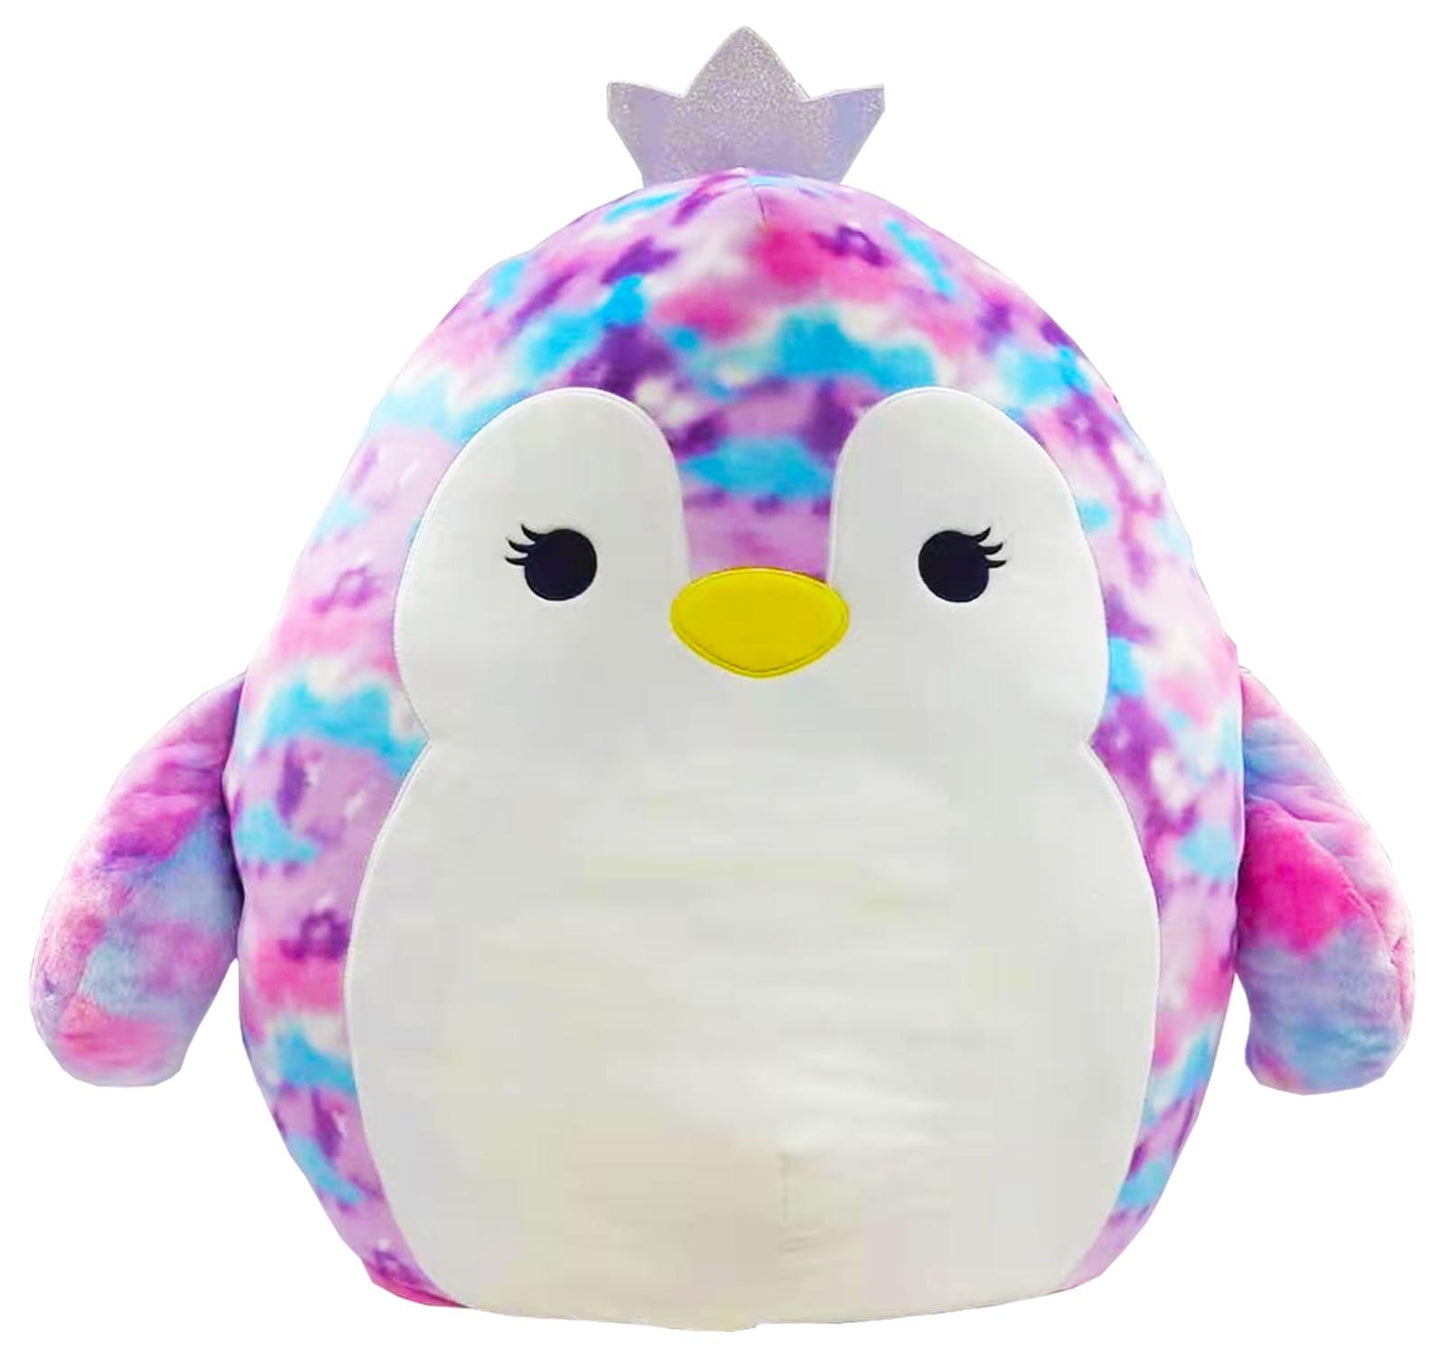 New Squishmallows Justice Exclusive Large 20" Violet Penguin Plush Pillow Toy 